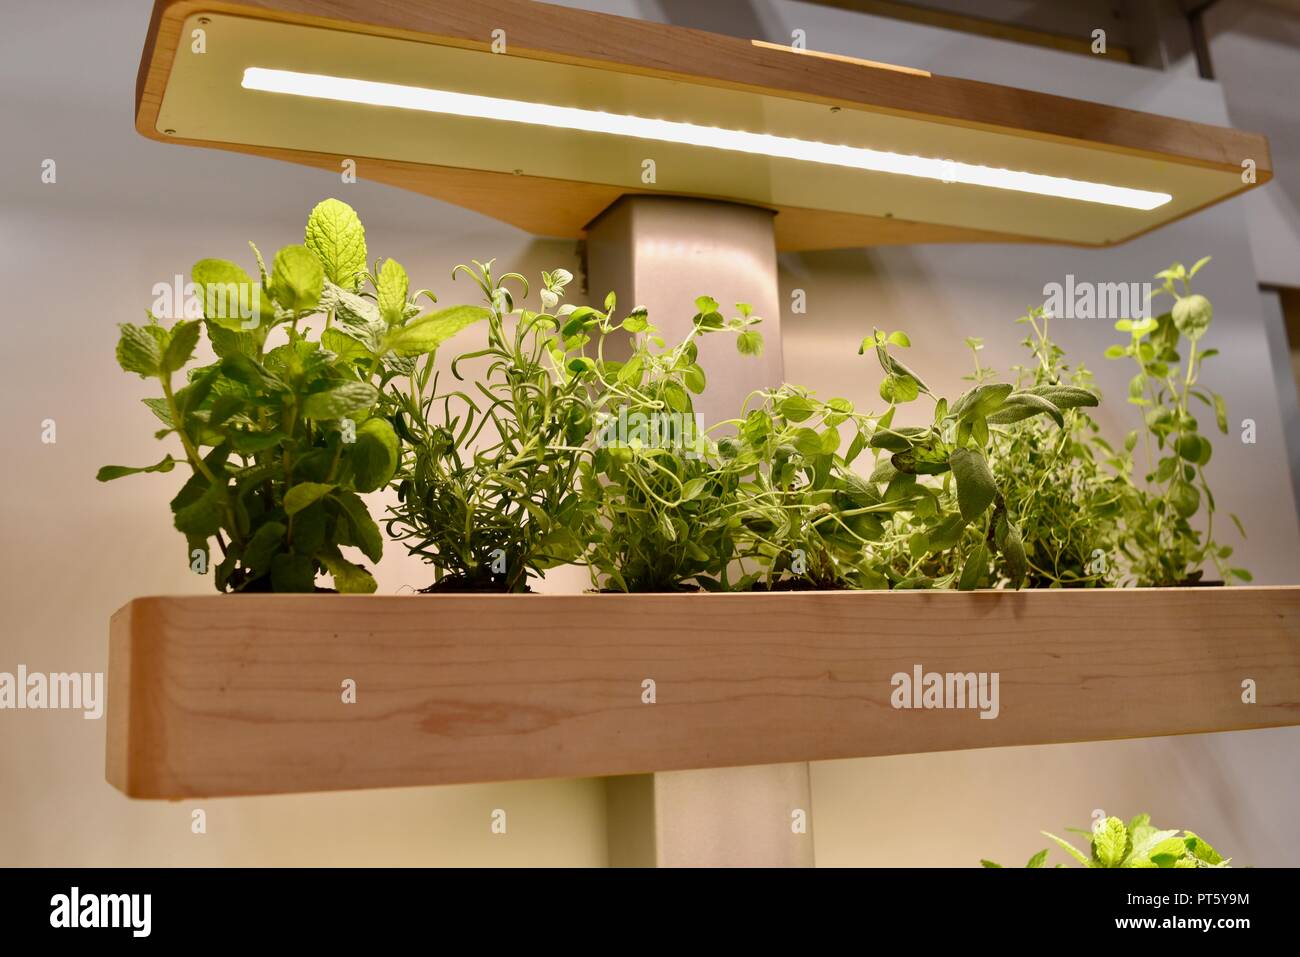 Indoor soil-free gardens with herb plants and vegetables, producing food, on display at the Consumer Electronics Show (CES) in Las Vegas, NV, USA. Stock Photo